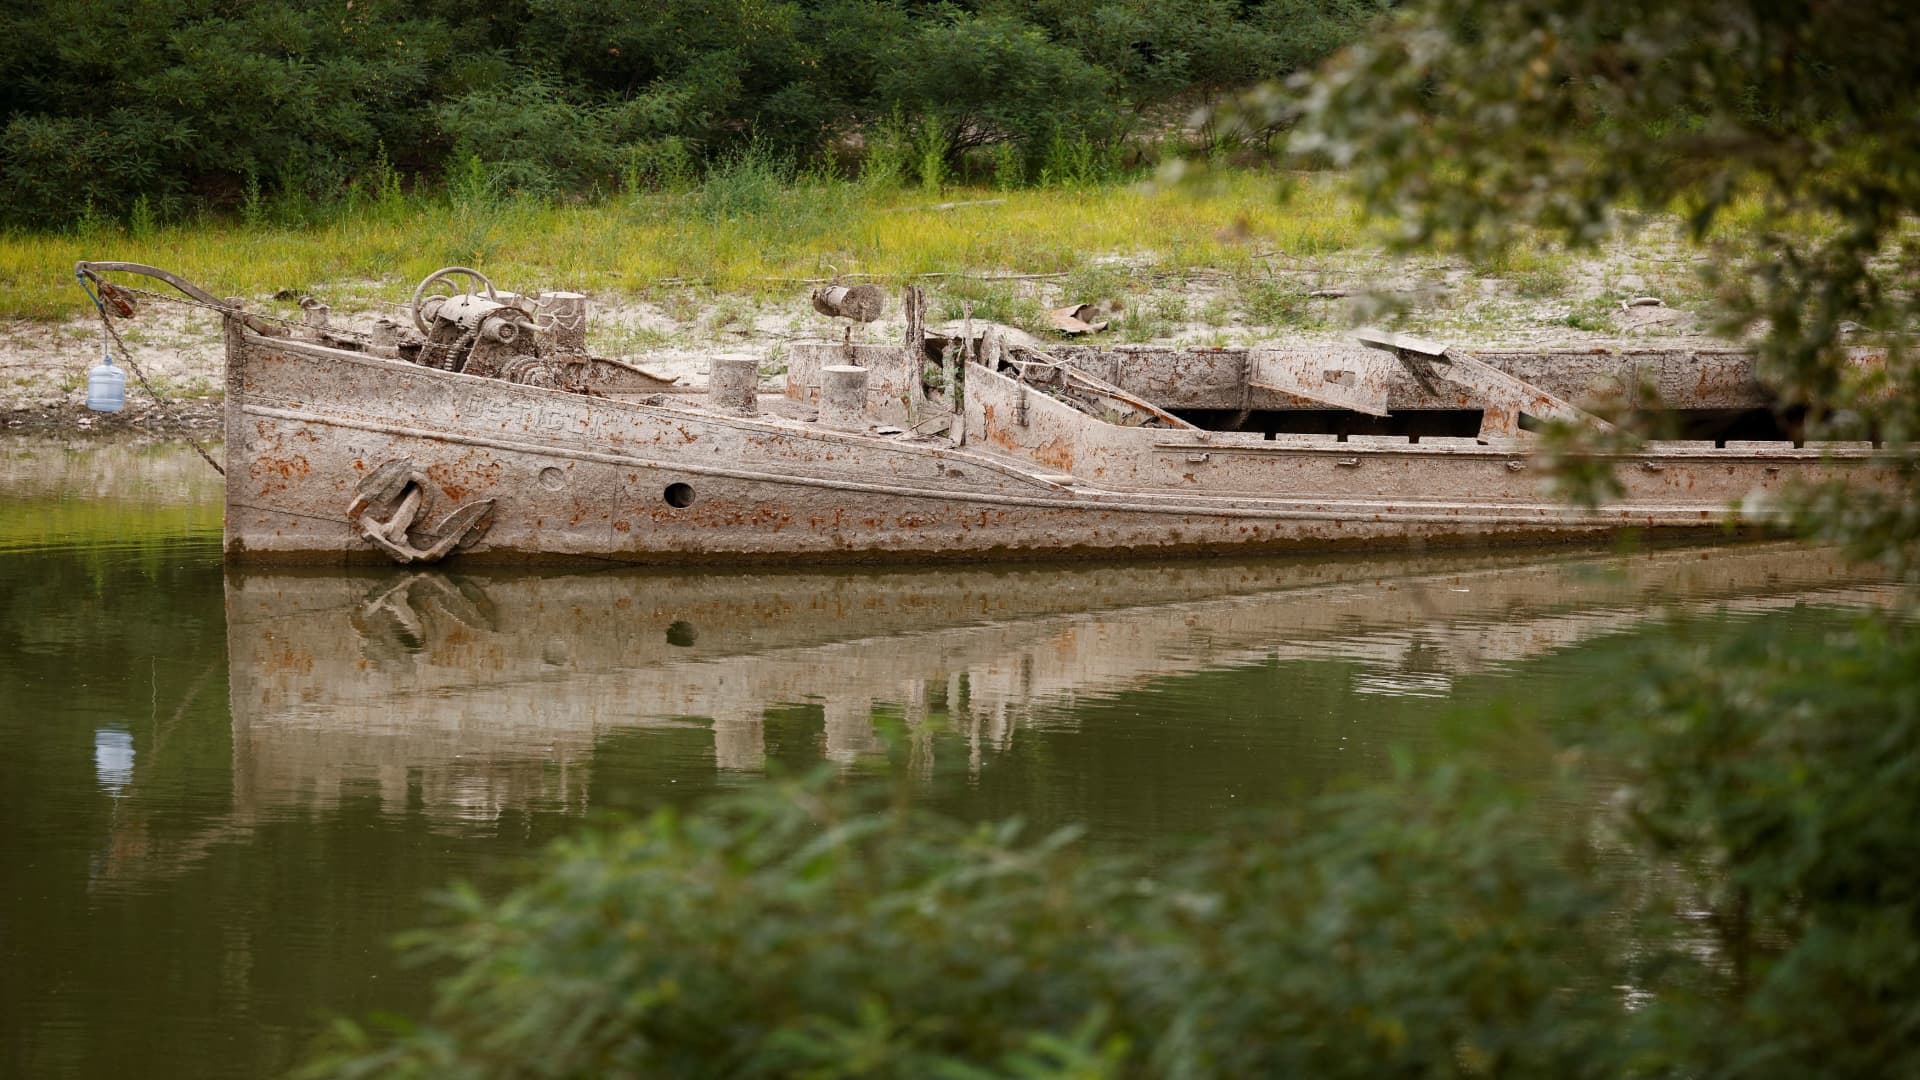 A barge that was sunk during WWII lies on Po's dry riverbed as parts of Italy's longest river and largest reservoir of freshwater have dried up due to the worst drought in the last 70 years, in Gualtieri, Italy, June 22, 2022. 